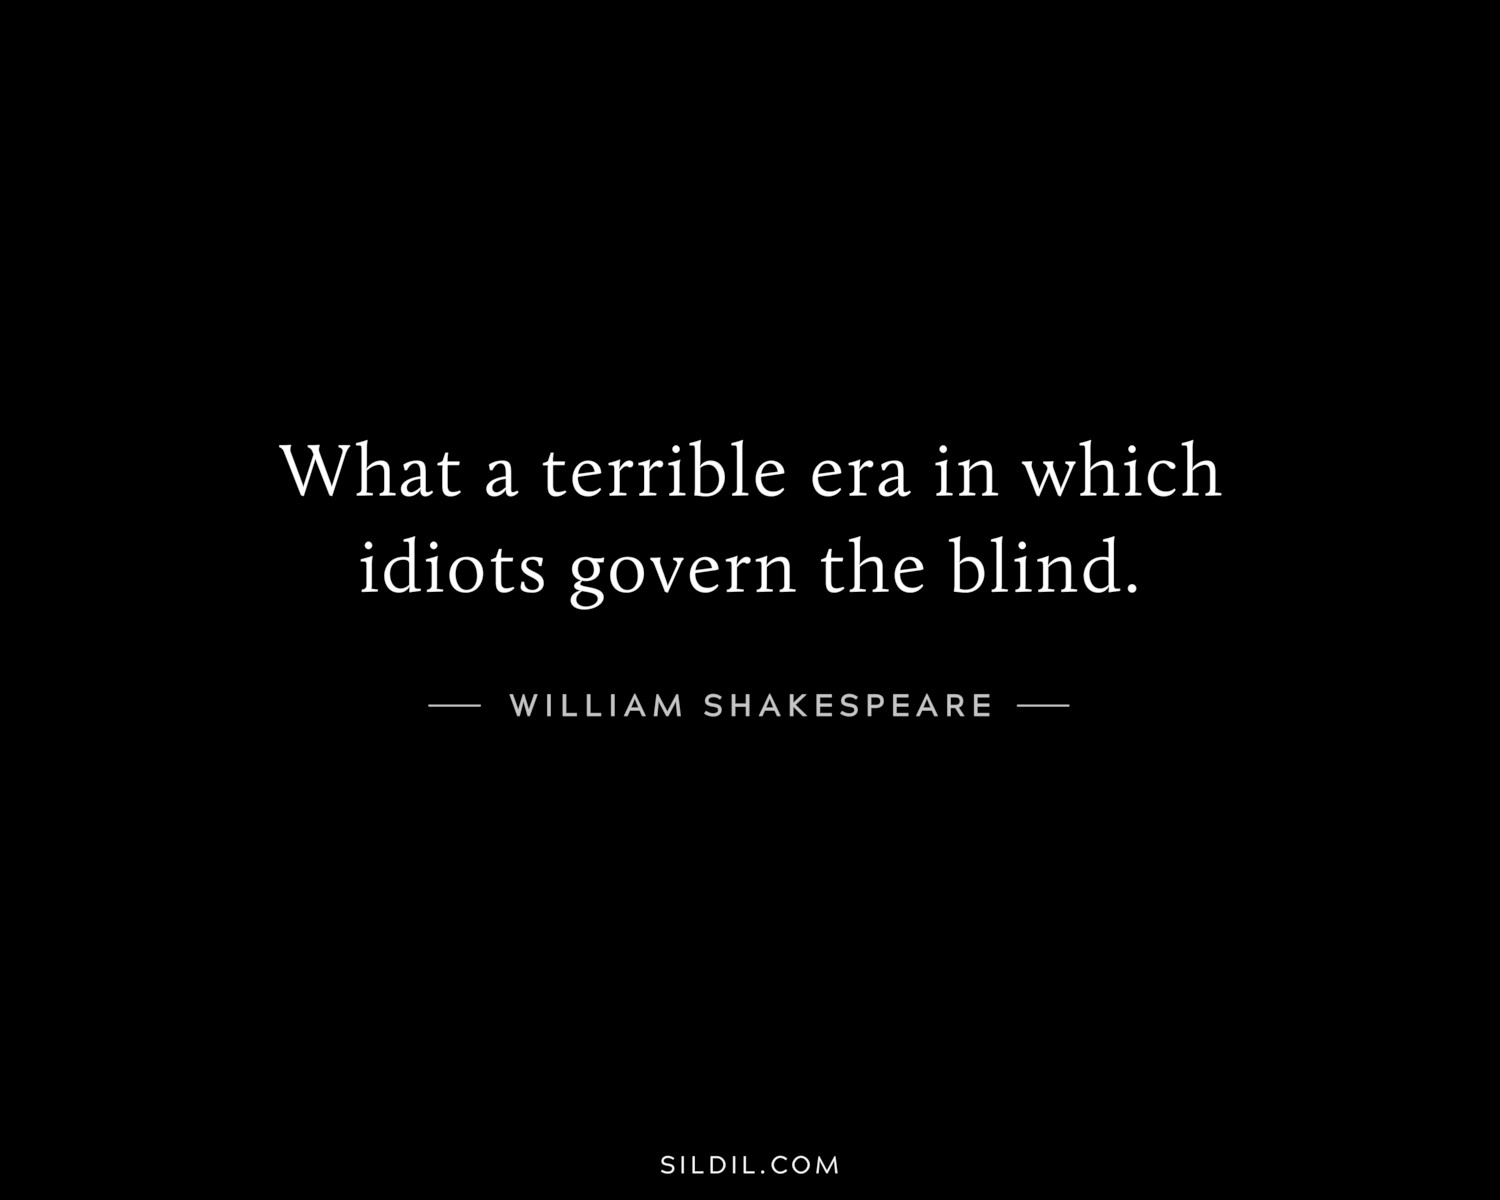 What a terrible era in which idiots govern the blind.